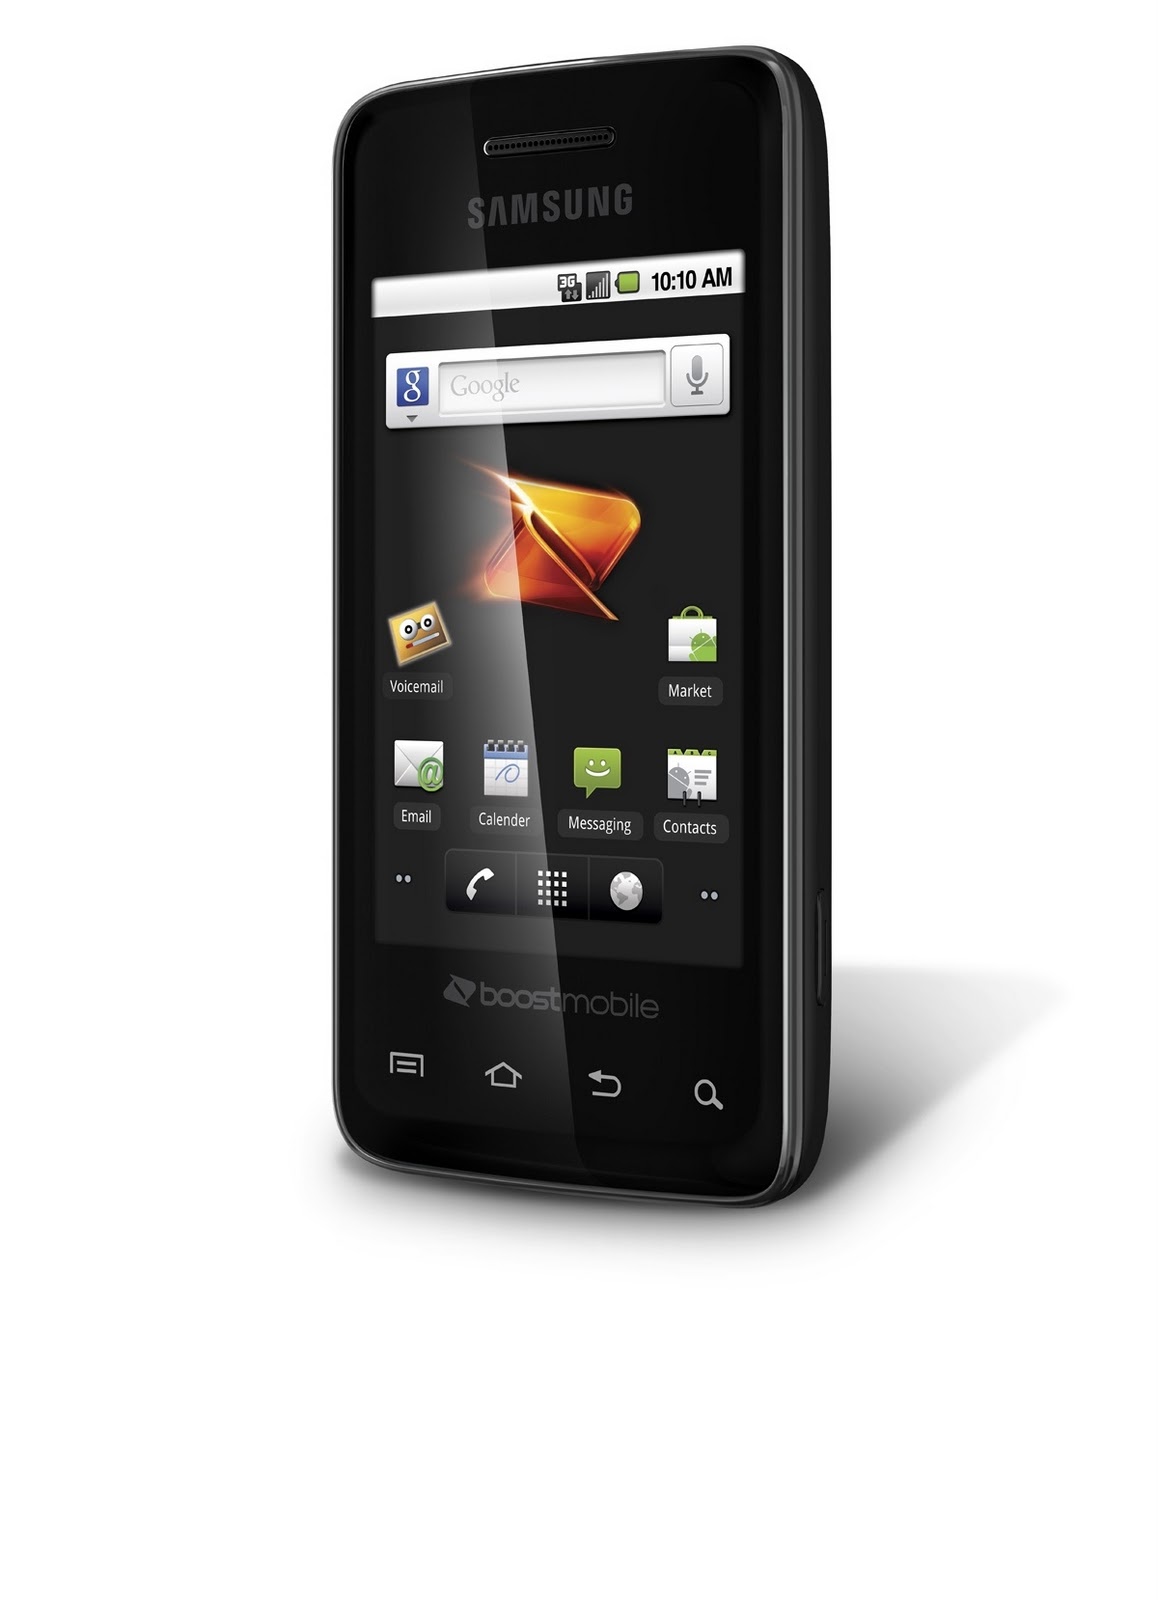 ANDROID BOOST MOBILE PHONES